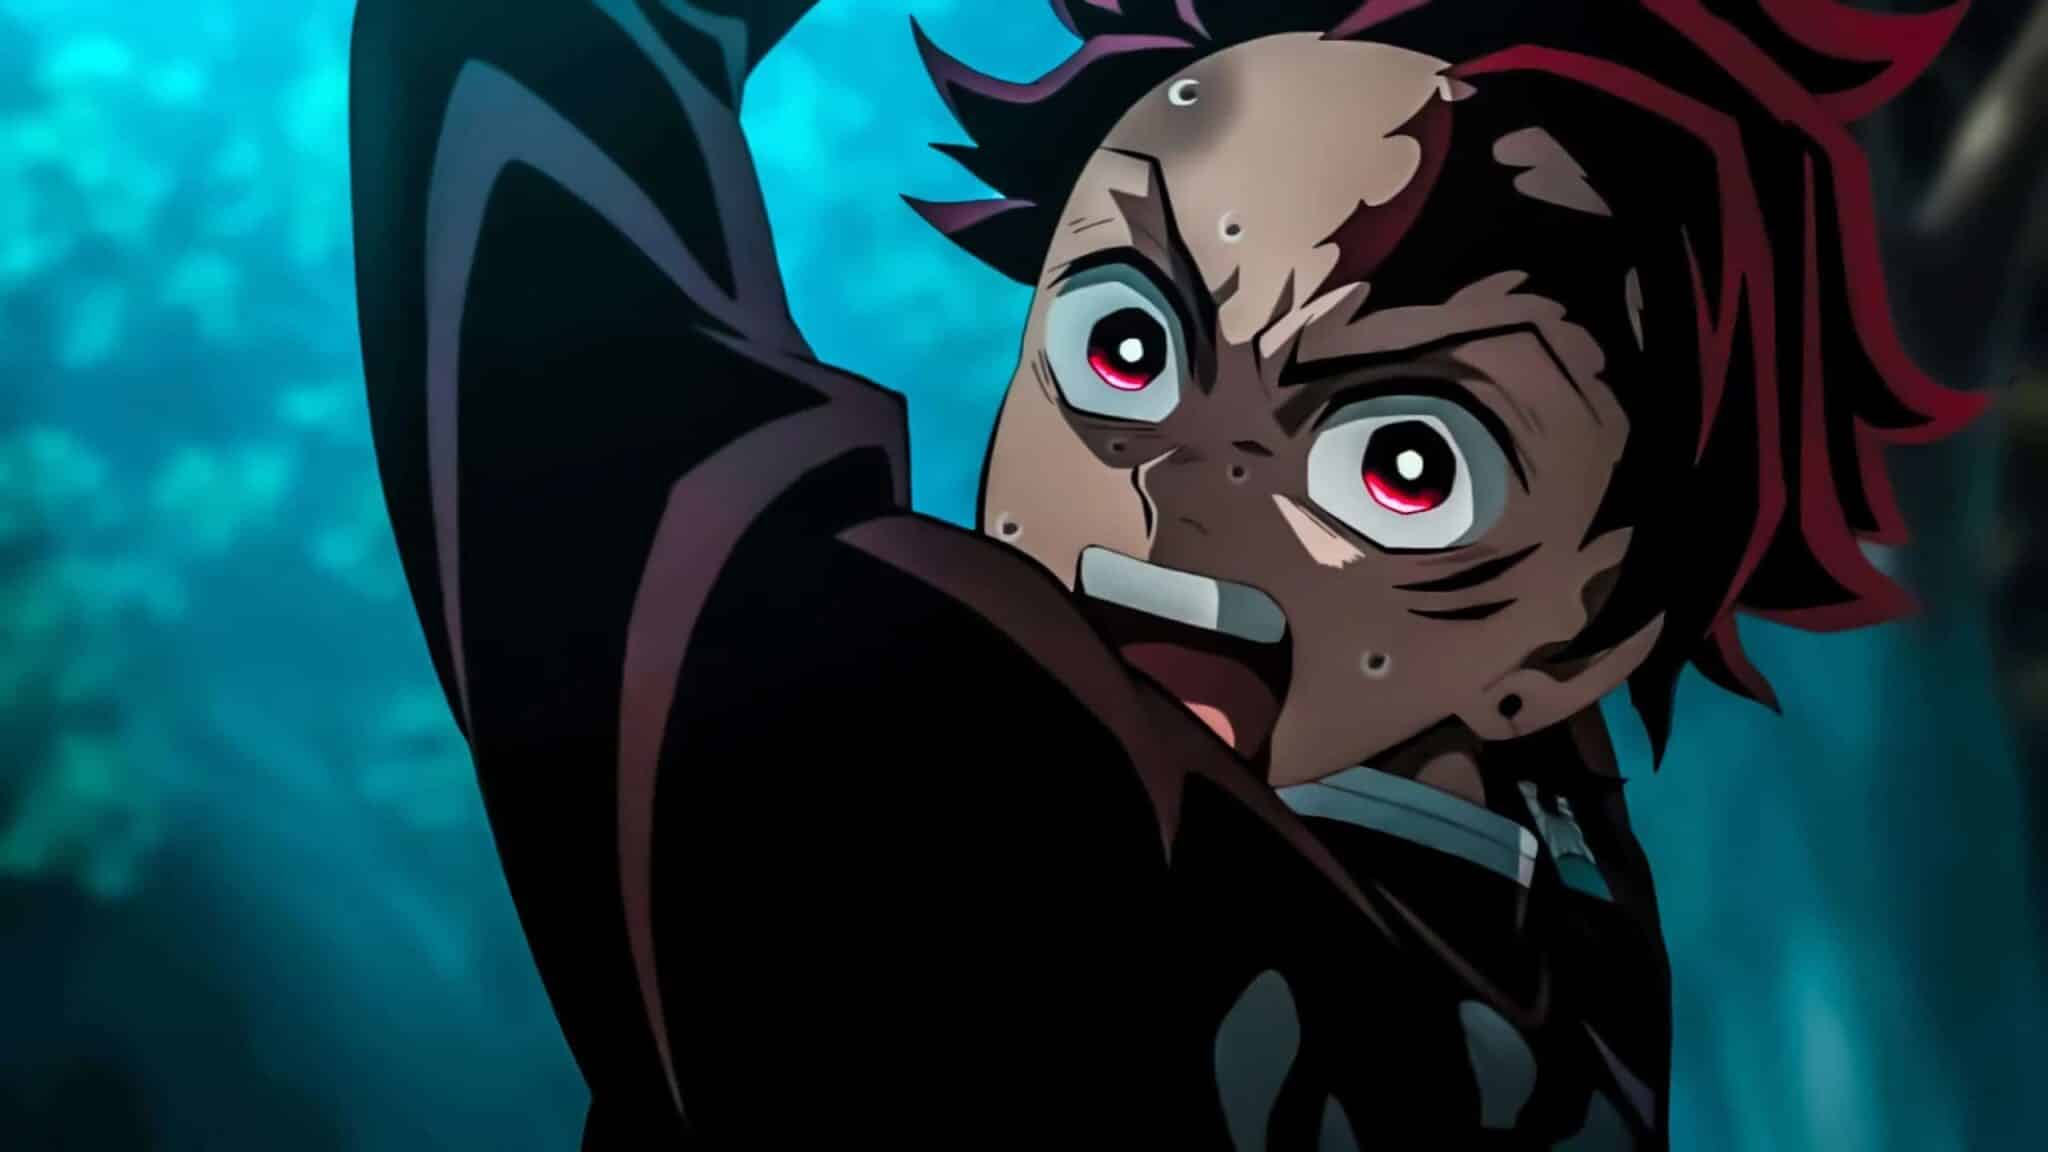 How to Watch Demon Slayer season 3: Excited about Demon Slayer